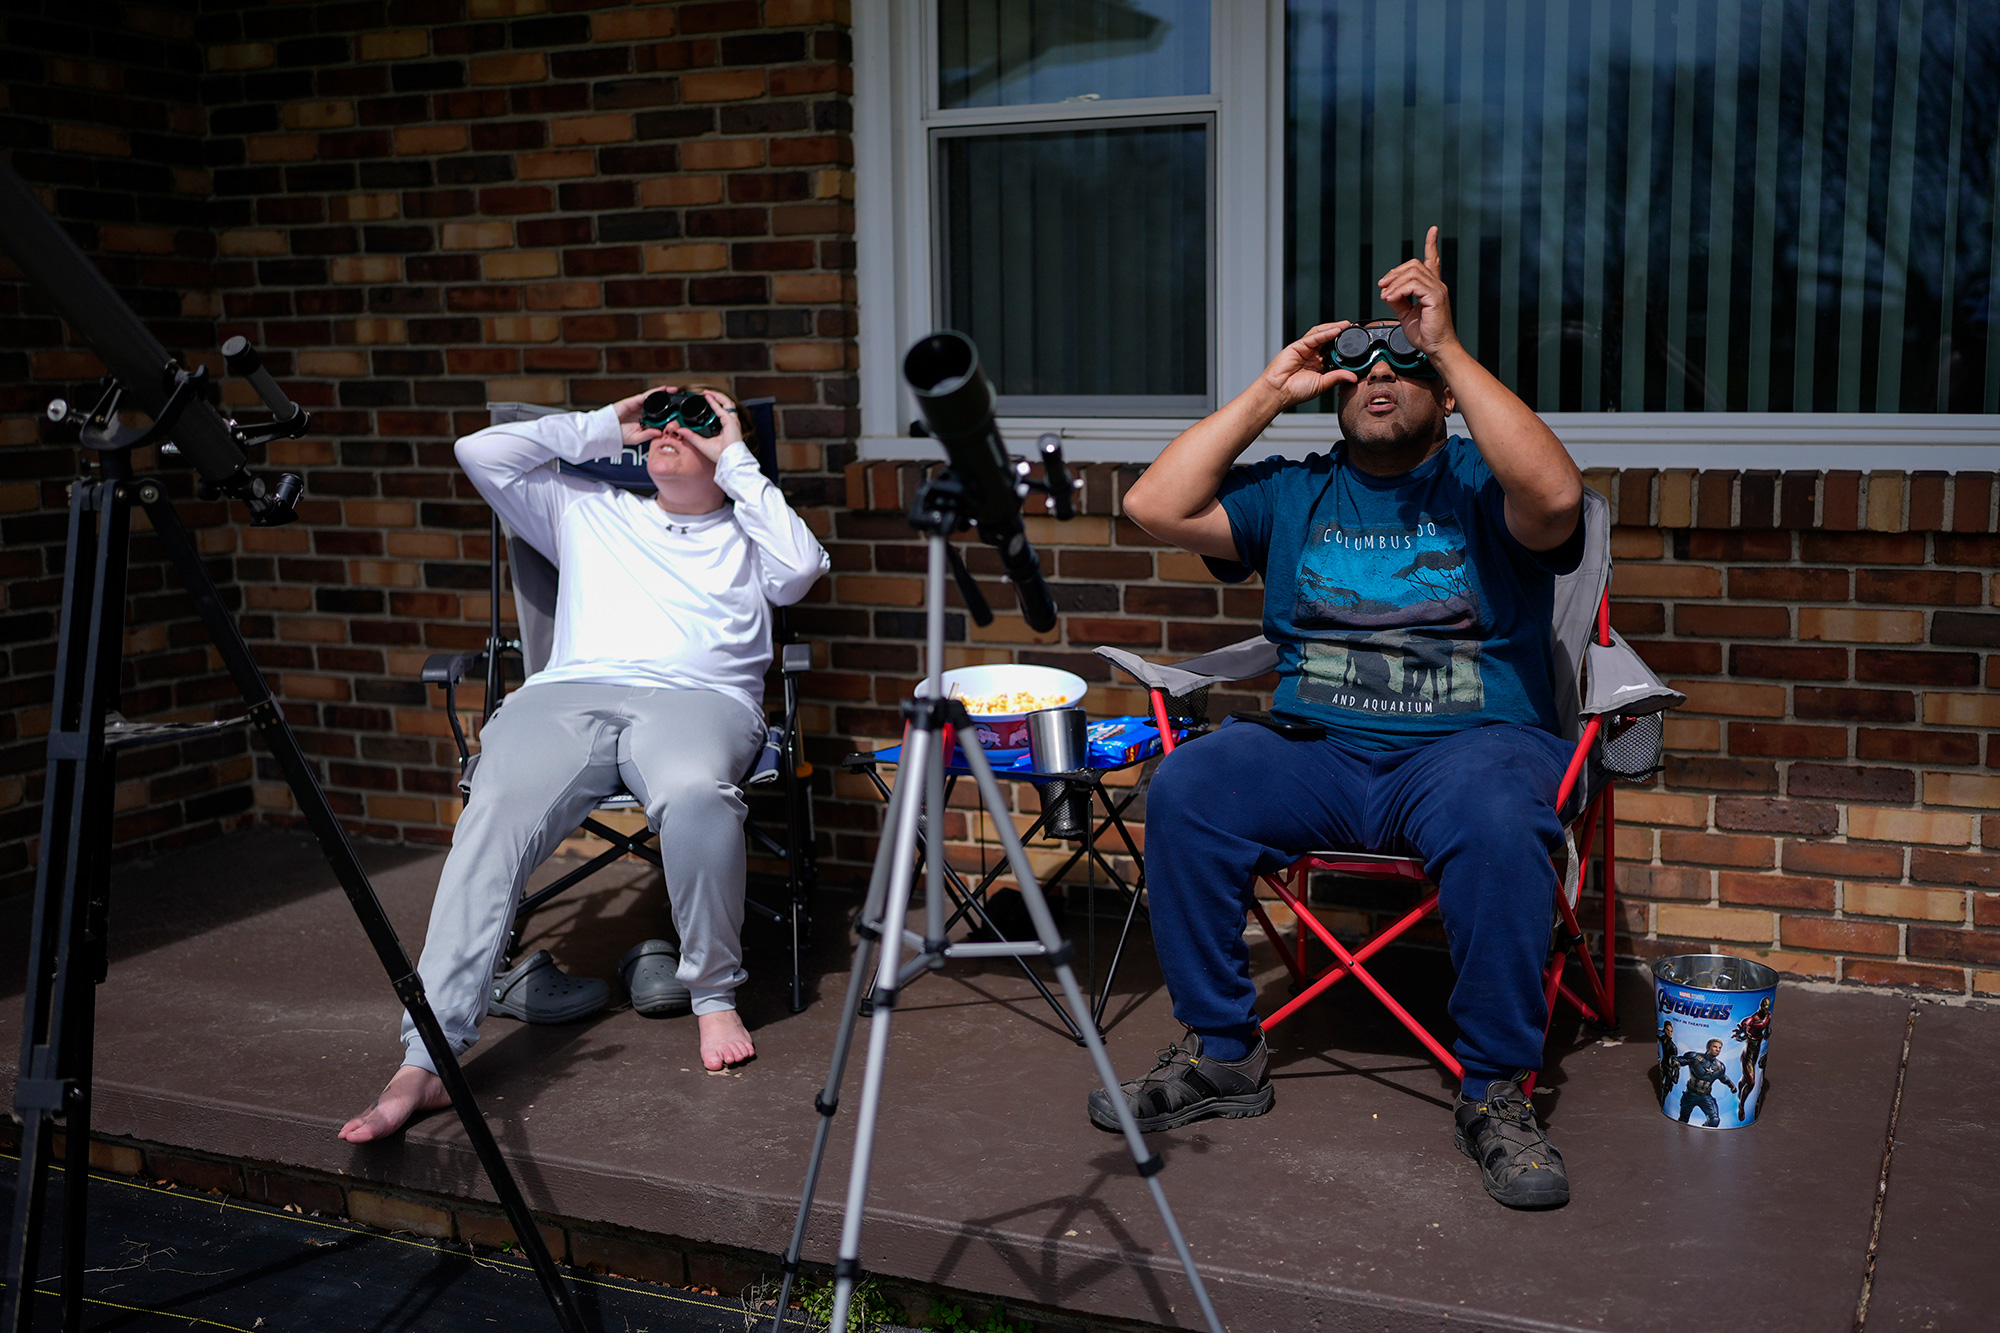 Melissa, left, and Michael Richards watch through solar goggles as the moon partially covers the sun during the total solar eclipse, in Wooster, Ohio.